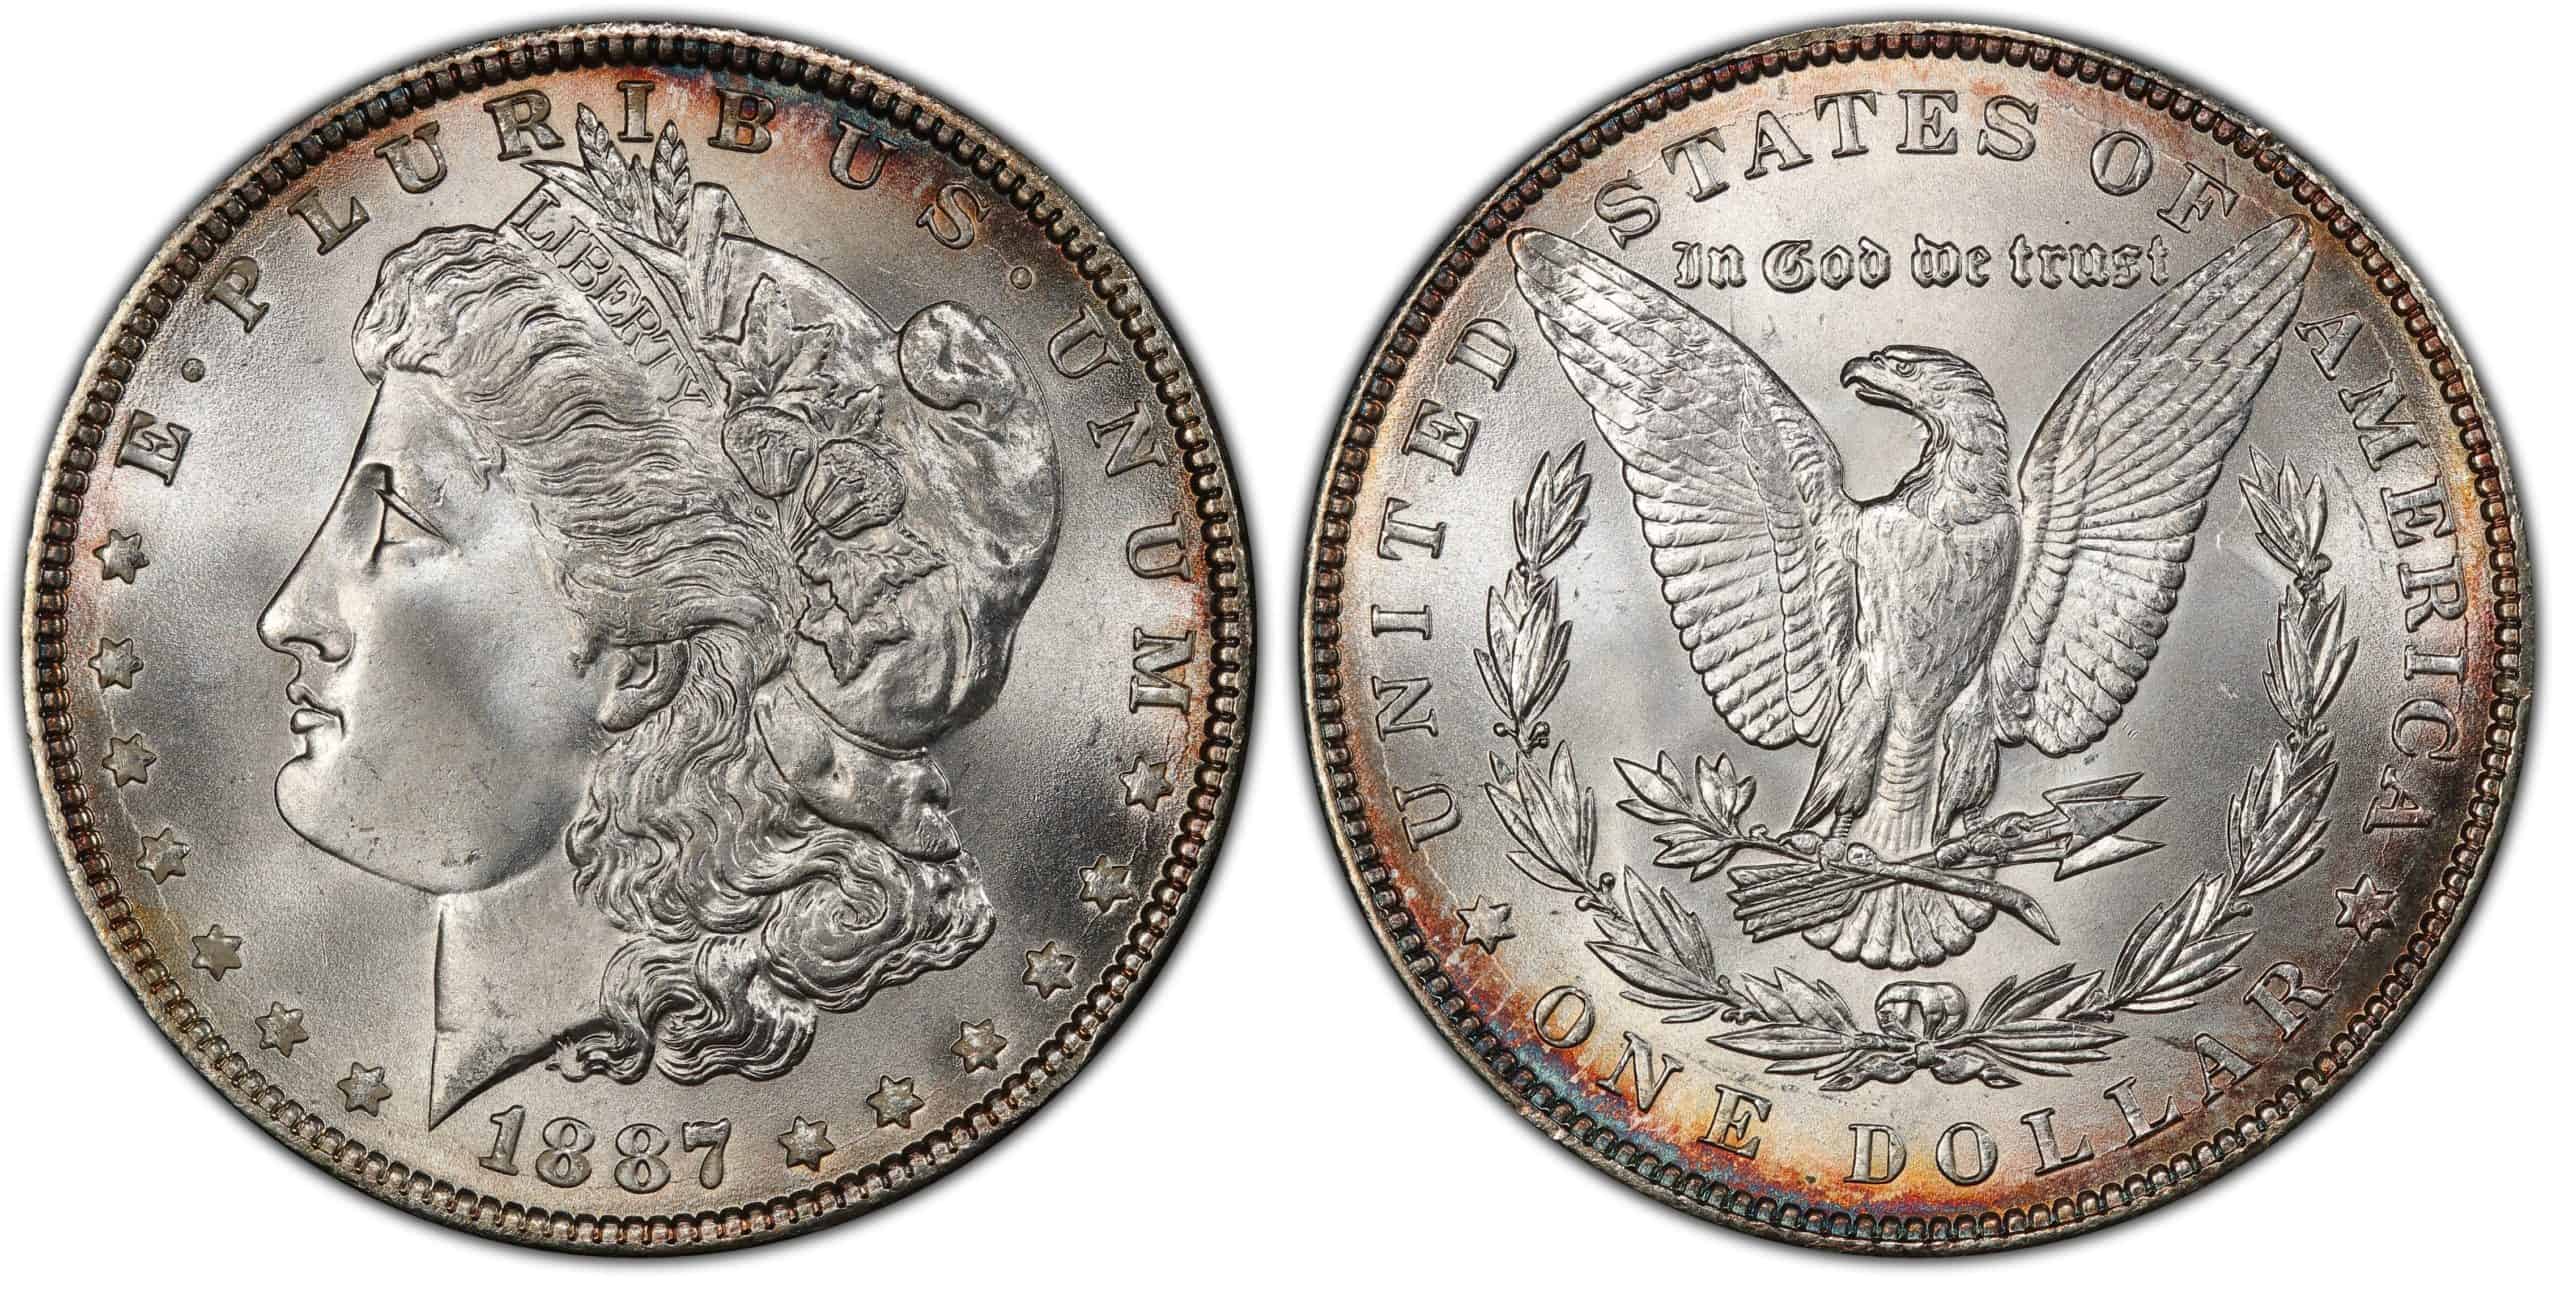 What is the Morgan silver dollar coin